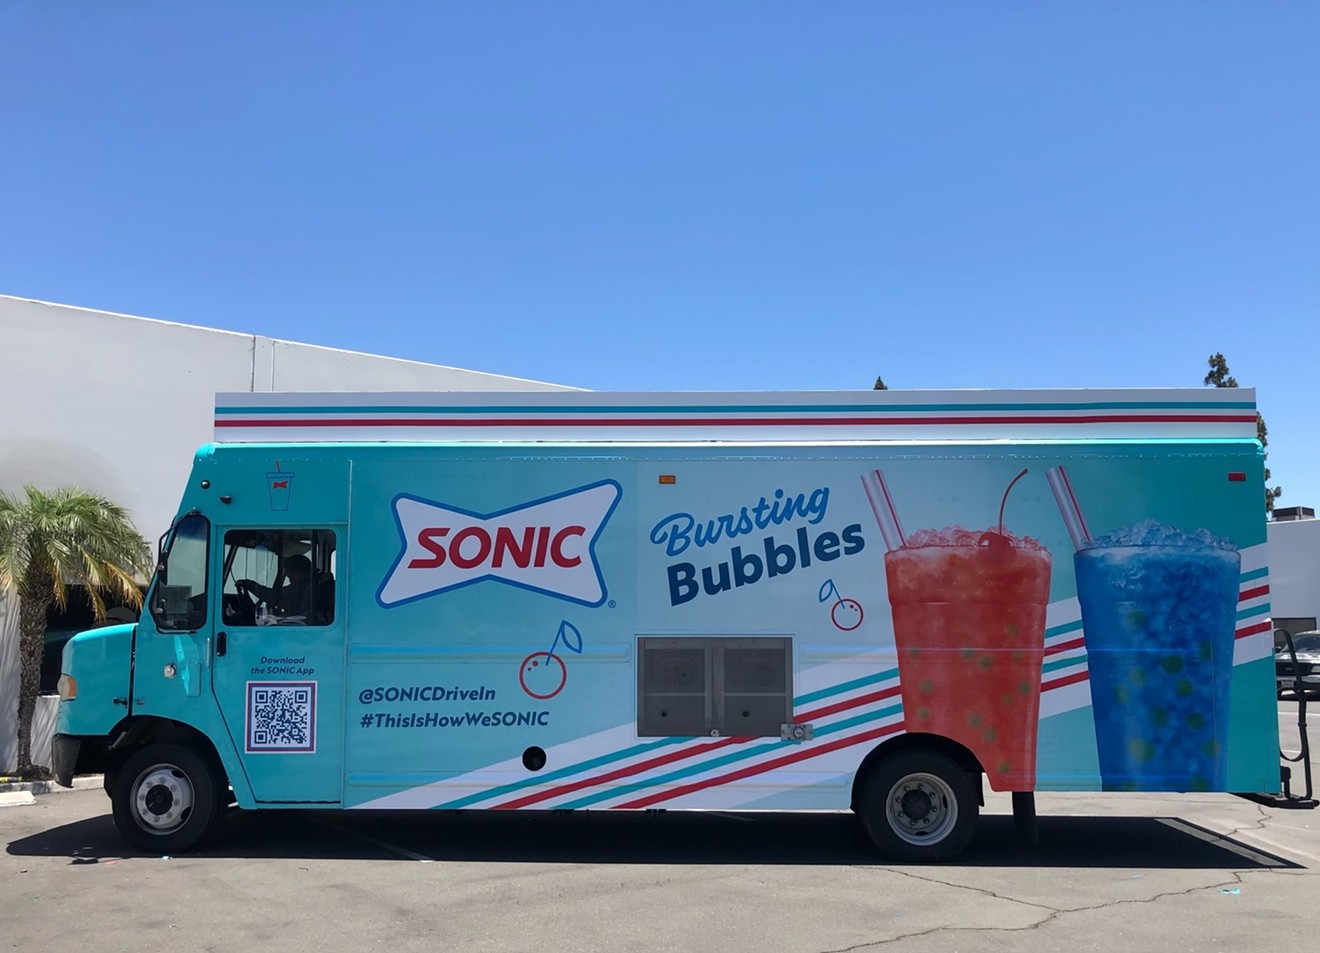 SONIC Drive-In will be sampling its latest drink creation, Bursting Bubbles